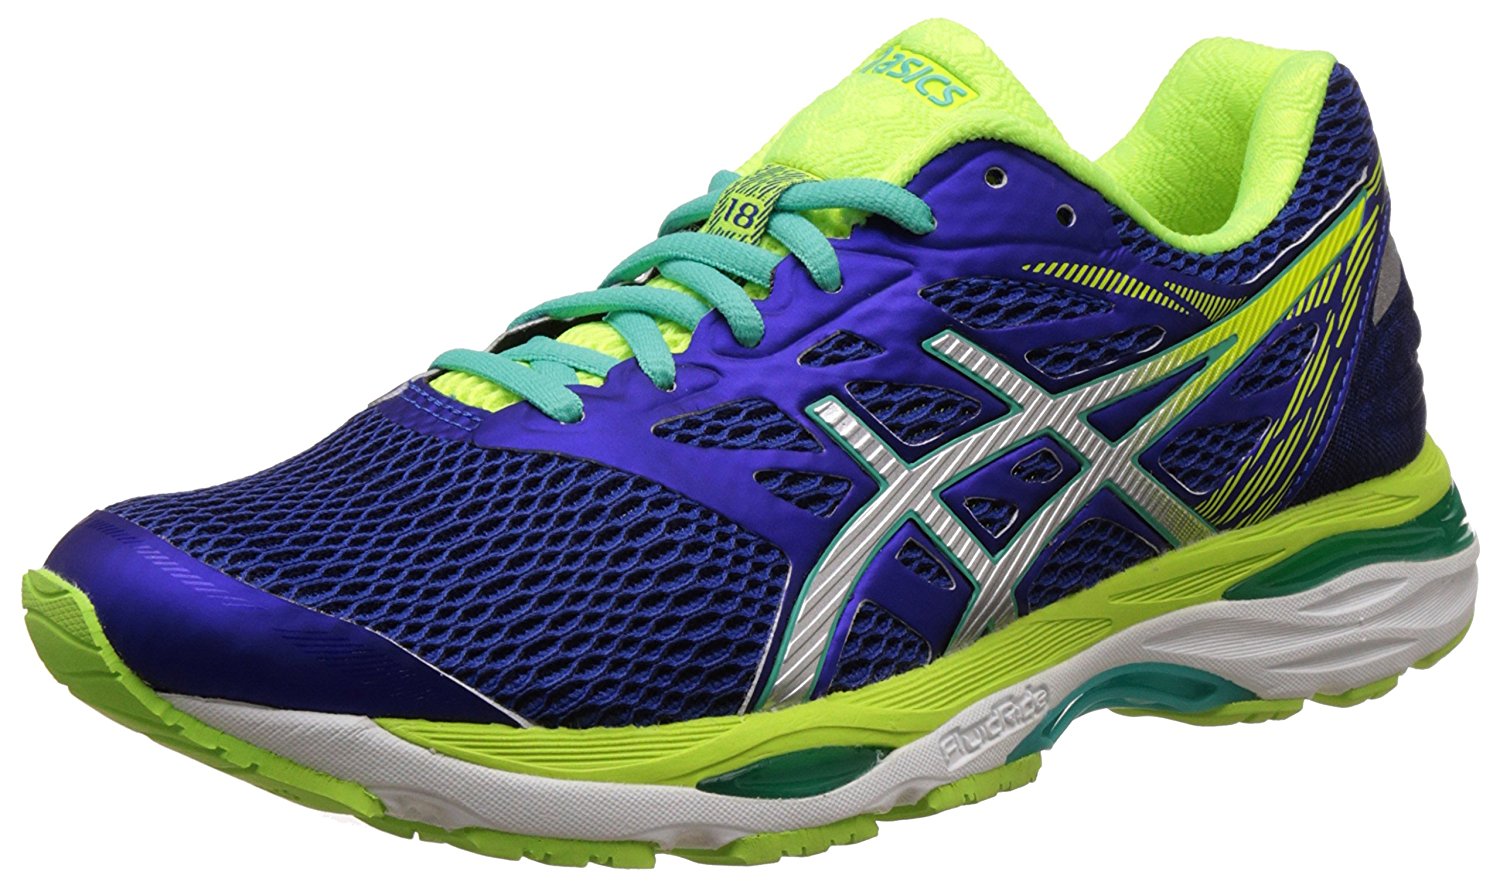 Buy Asics Women's Blue Sports Shoes Online @ ₹9999 from ShopClues